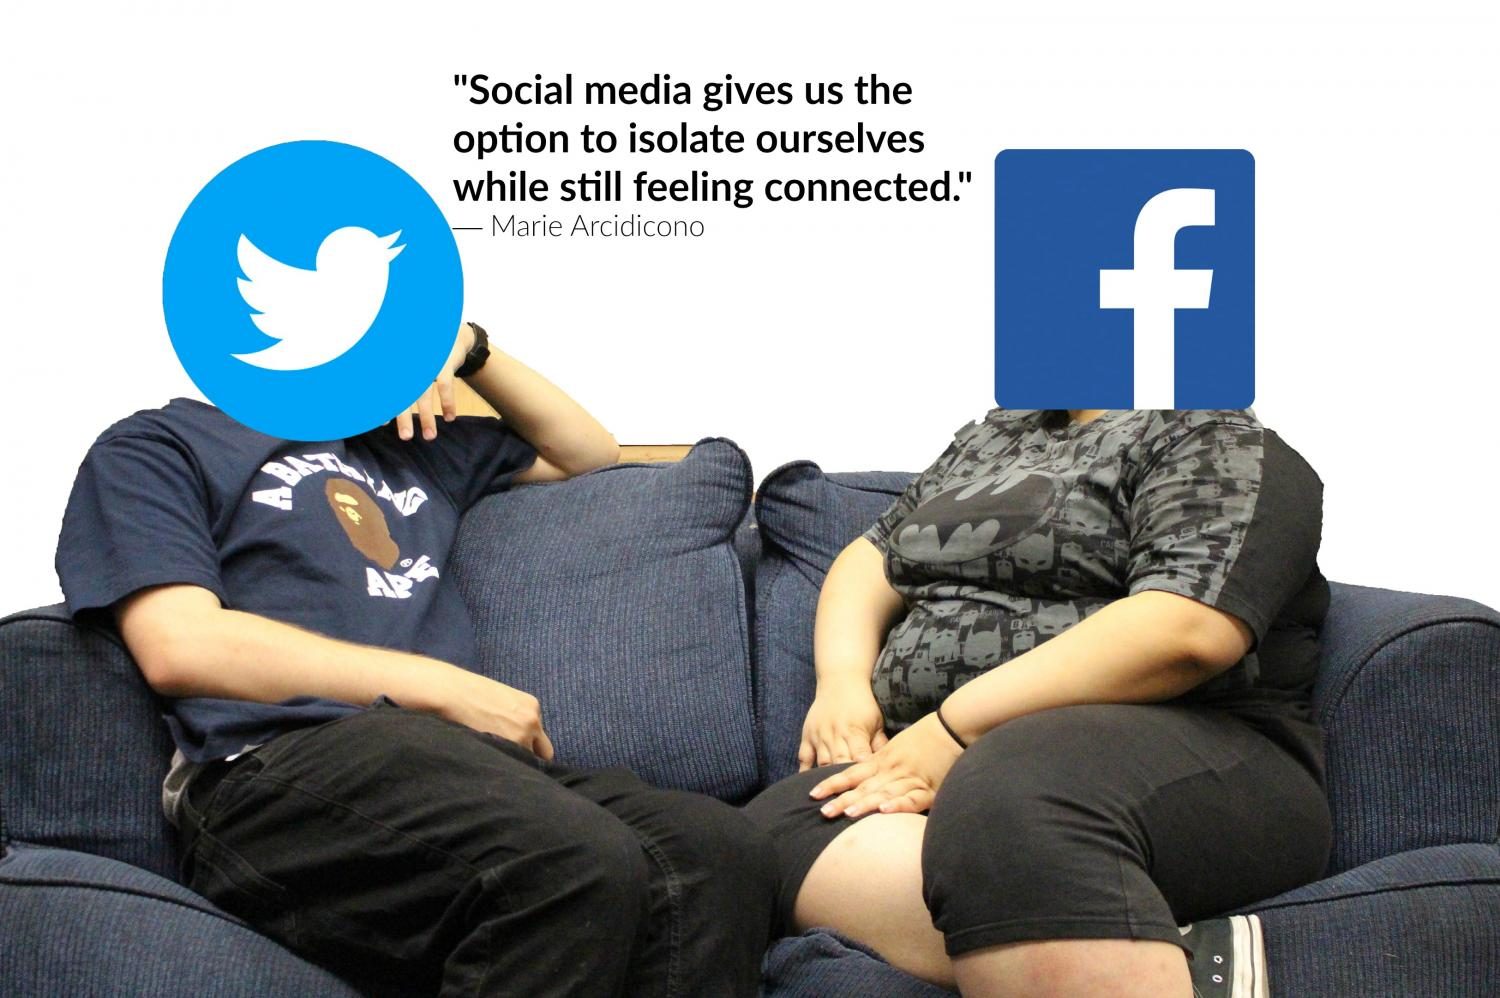 Social media affects social norms